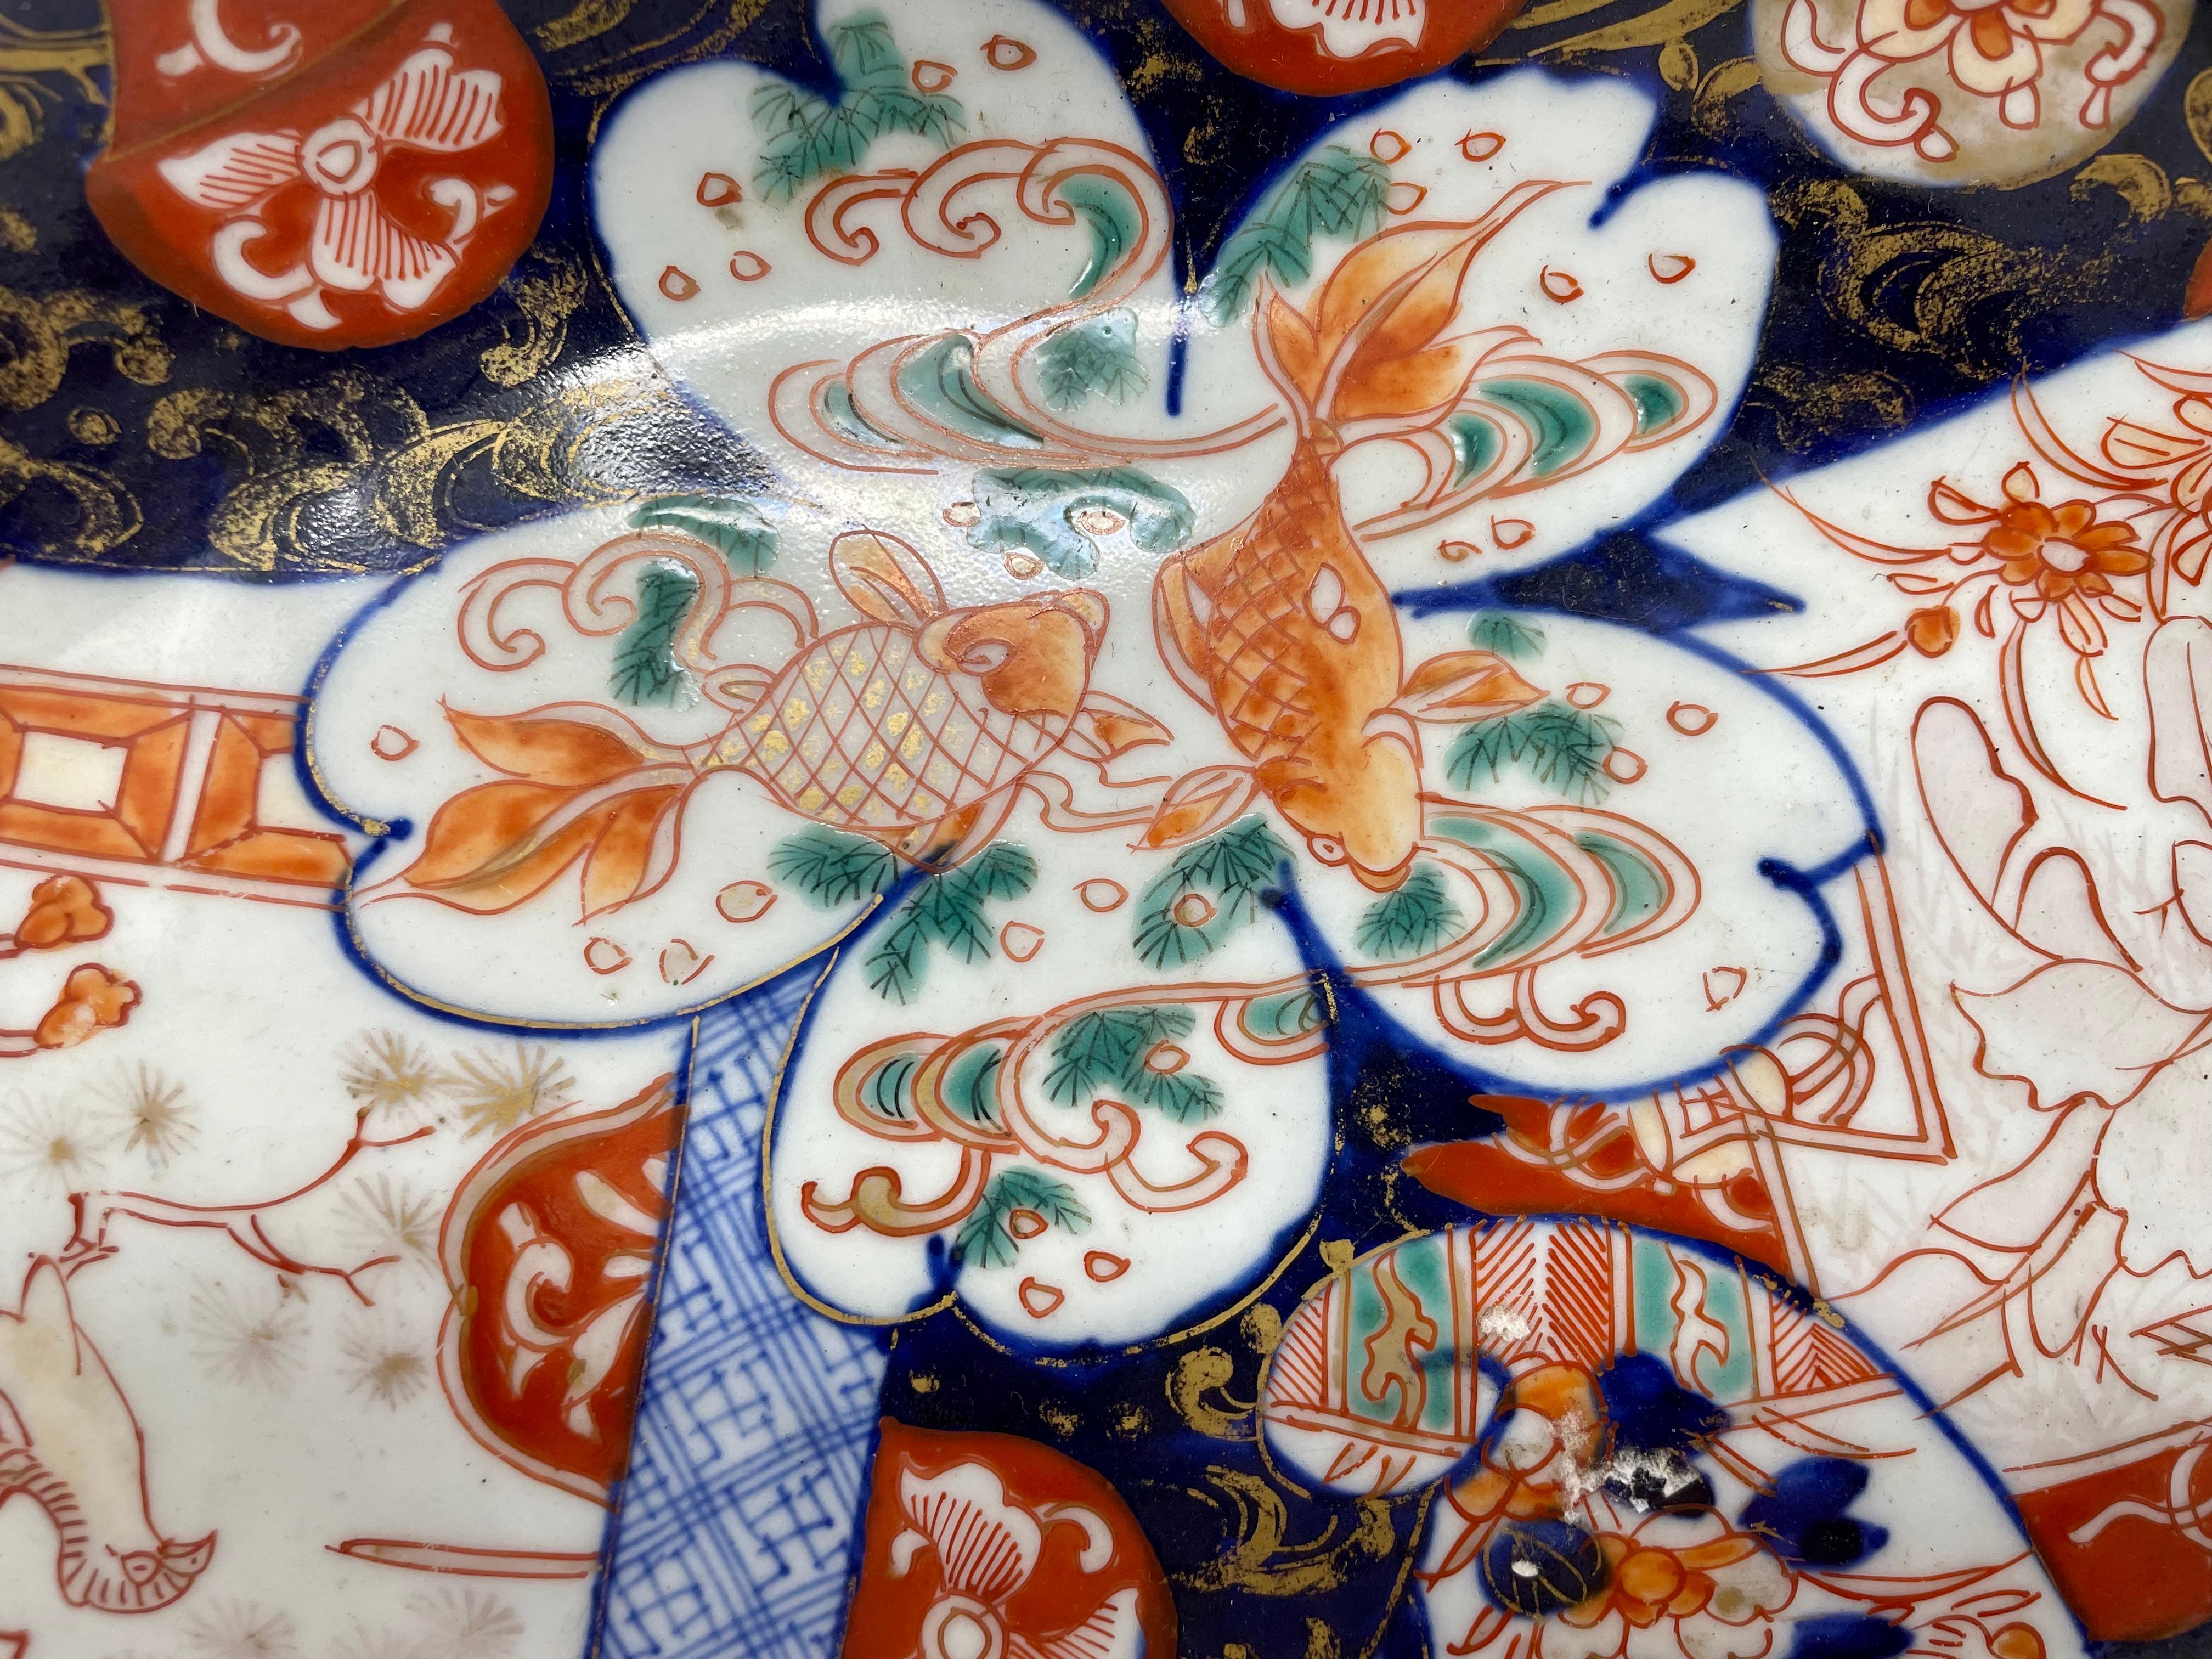 Antique 19th Century Japanese Imari Plate in the shape of a boat. Very stylisha and different!